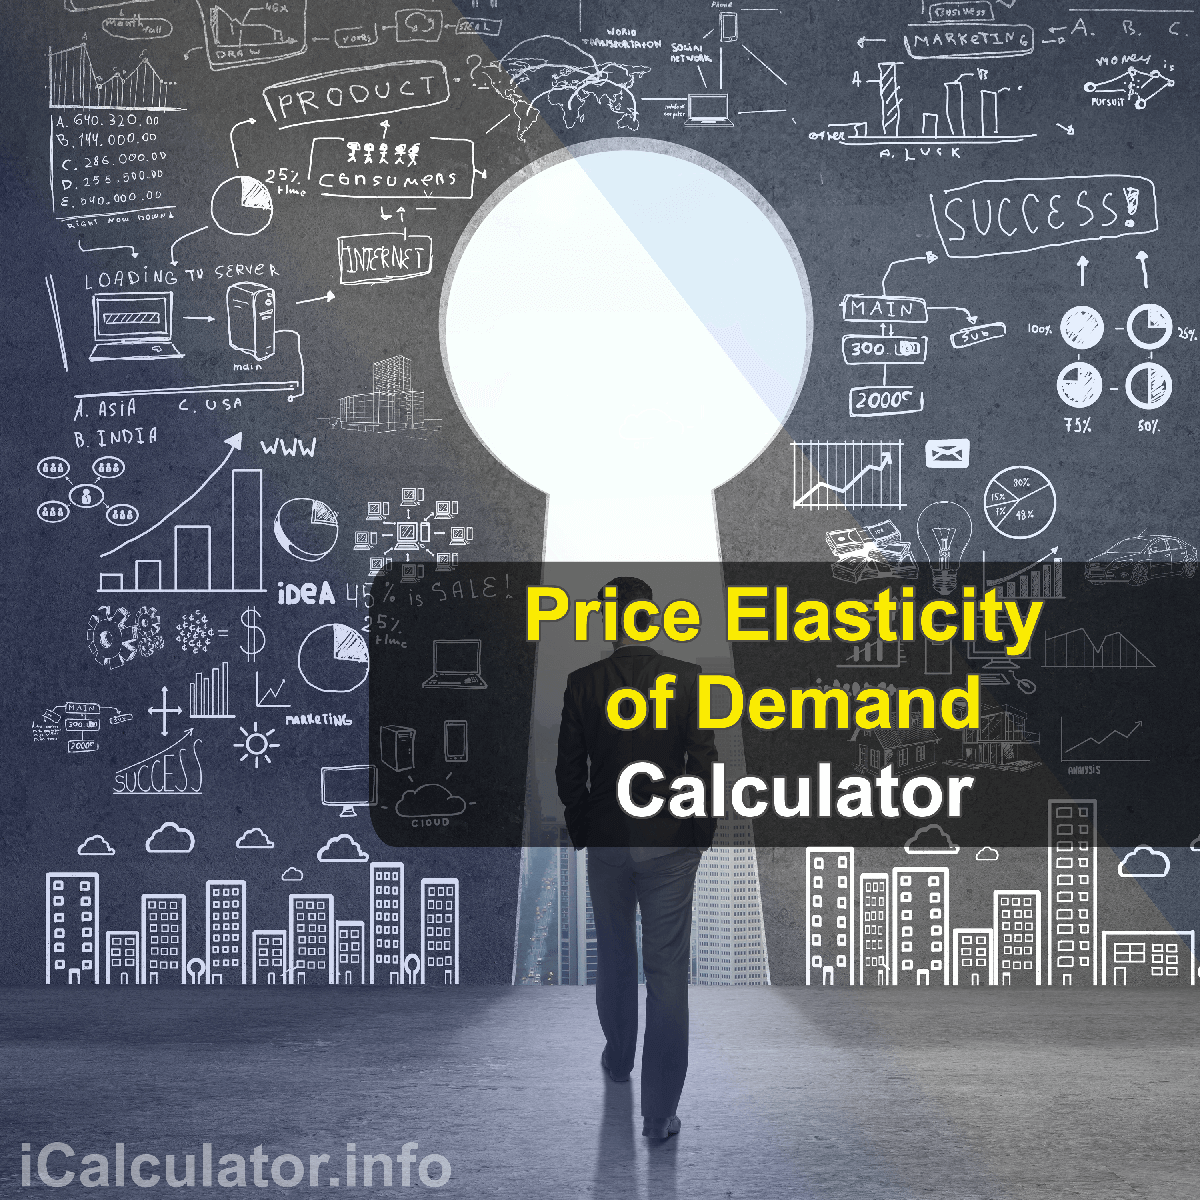 Price Elasticity of Demand Calculator. This image provides details of how to calculate the price elasticity effect of supply and demand using a good calculator and notepad. By using the either of the iprice elasticity formula, the Price Elasticity of Demand Calculator provides a true calculation of how the demand will decrease as the price iss increased and vice-versa.